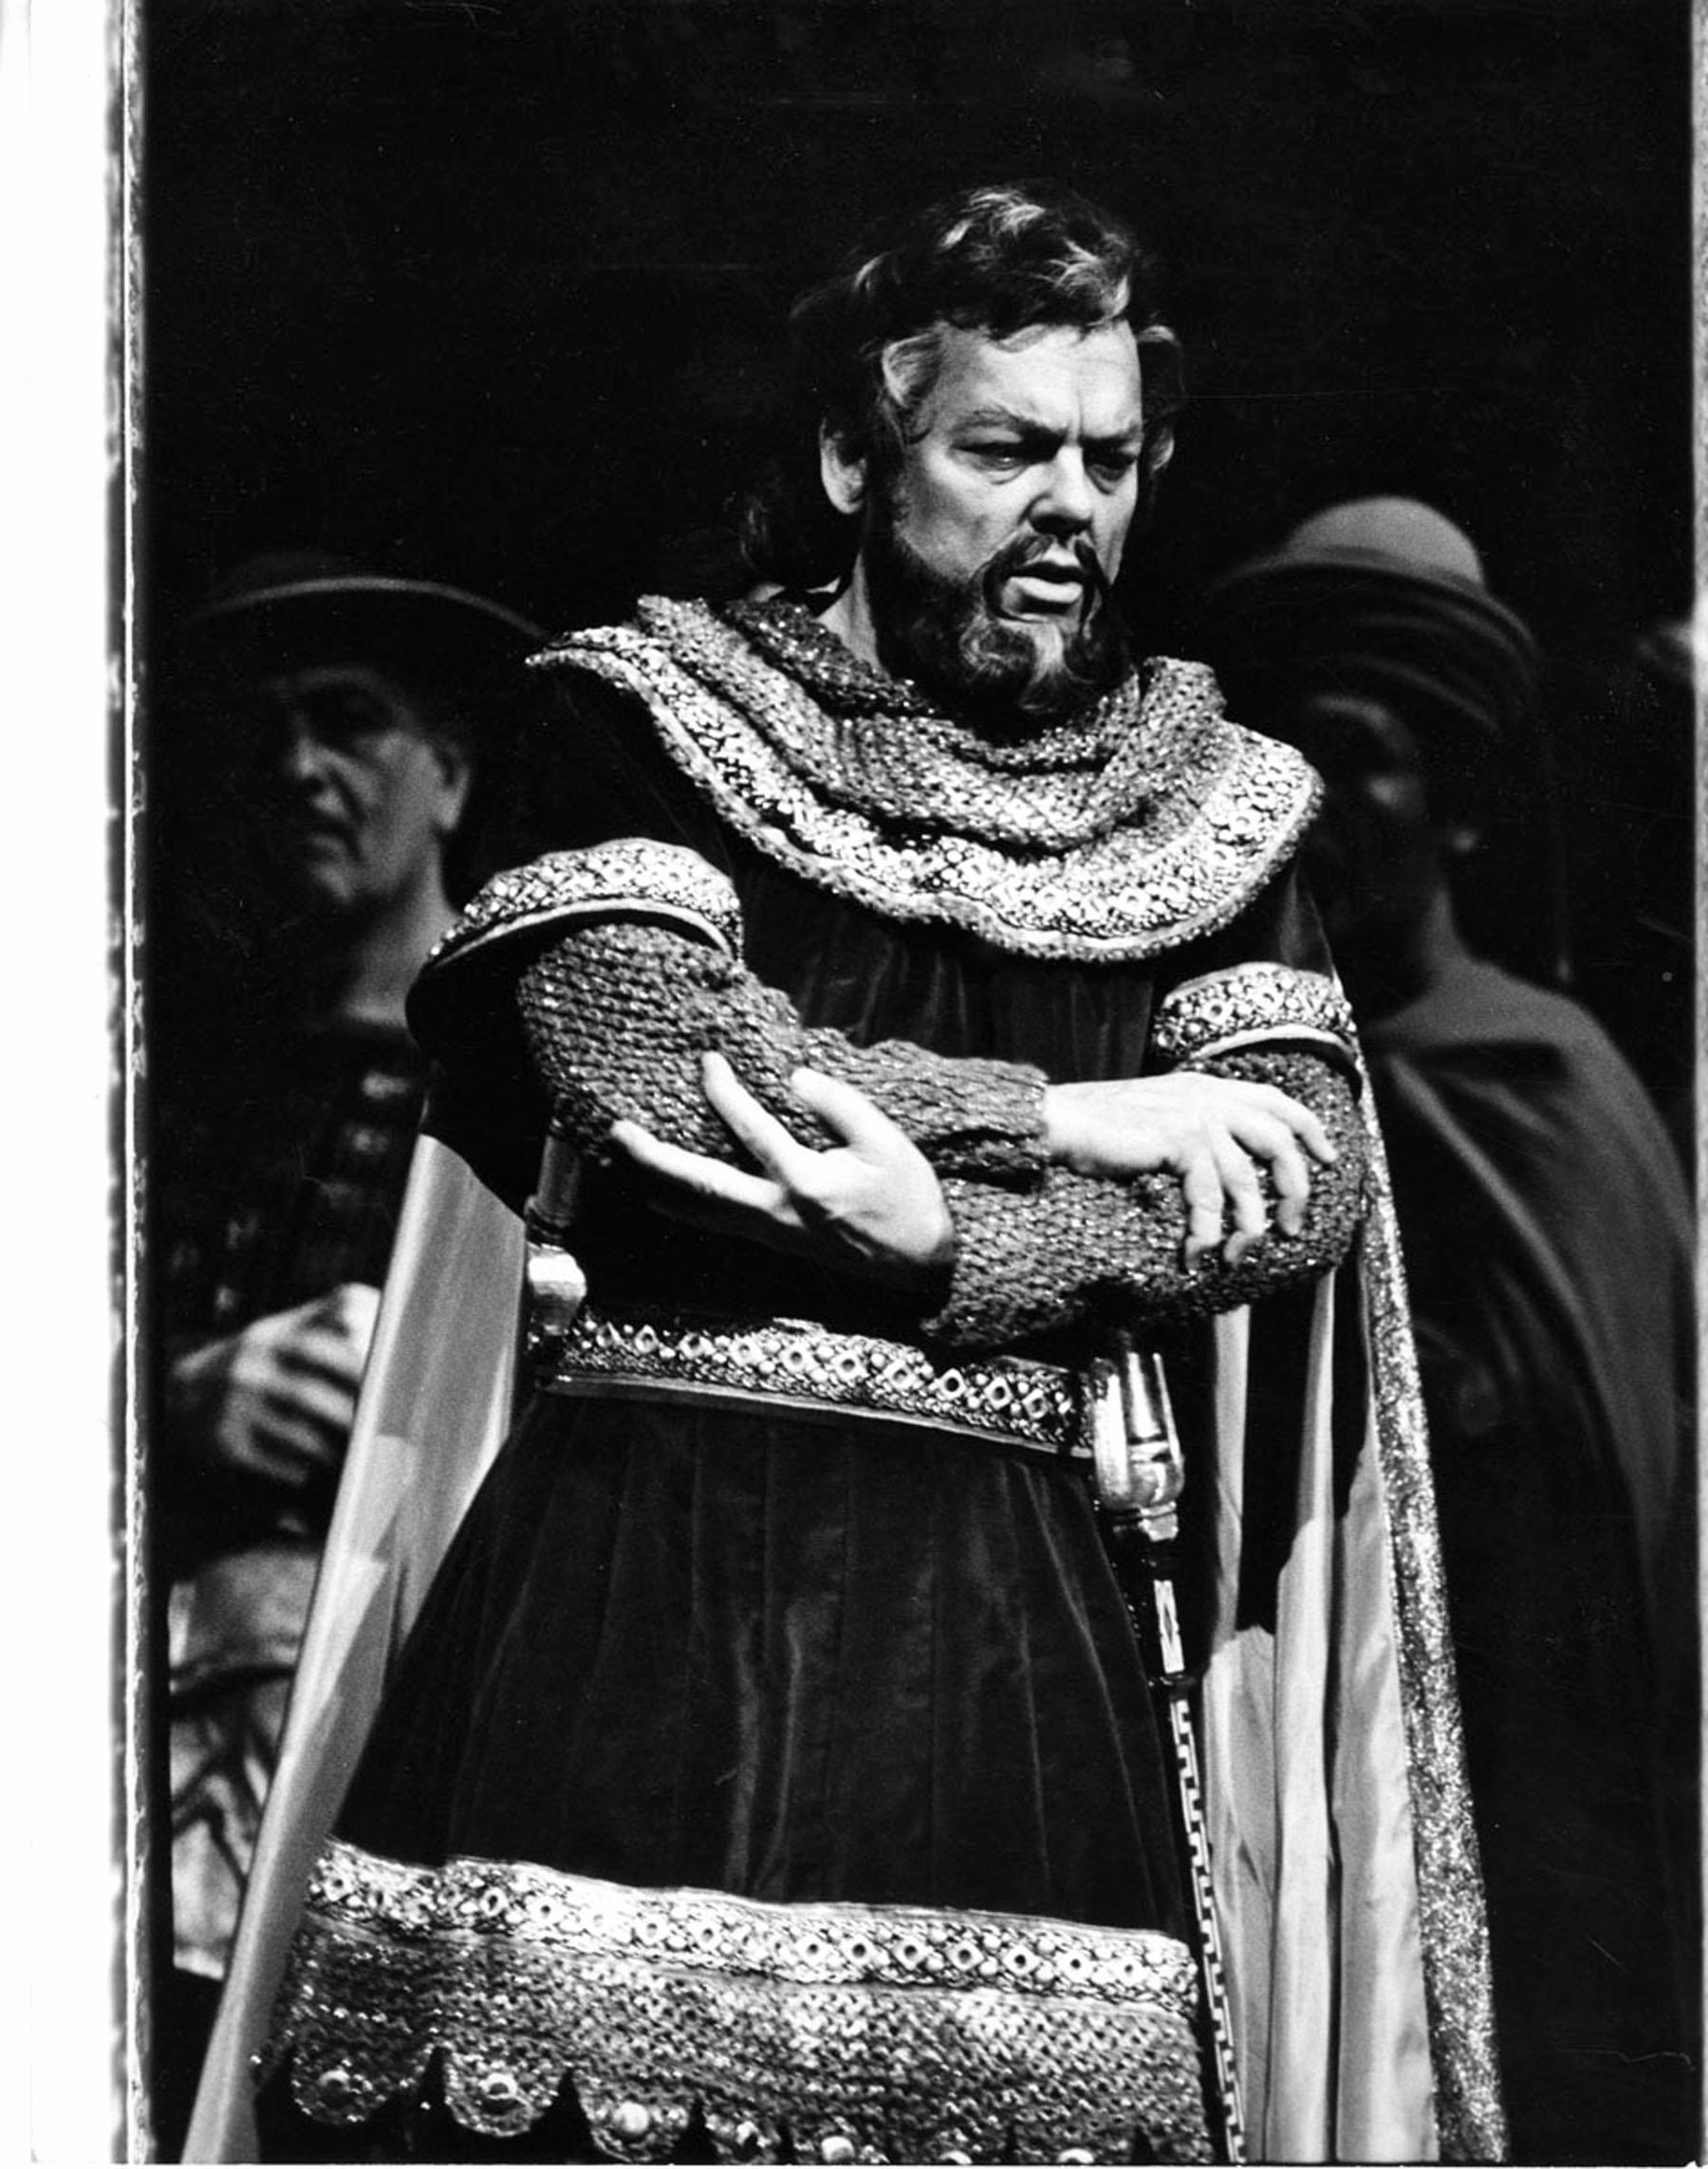 Black and White Photograph Jack Mitchell - « Seige of Corinth » (Seige of Corinth) du tenor opéra Harry Theyard au MET, signé par Mitchell